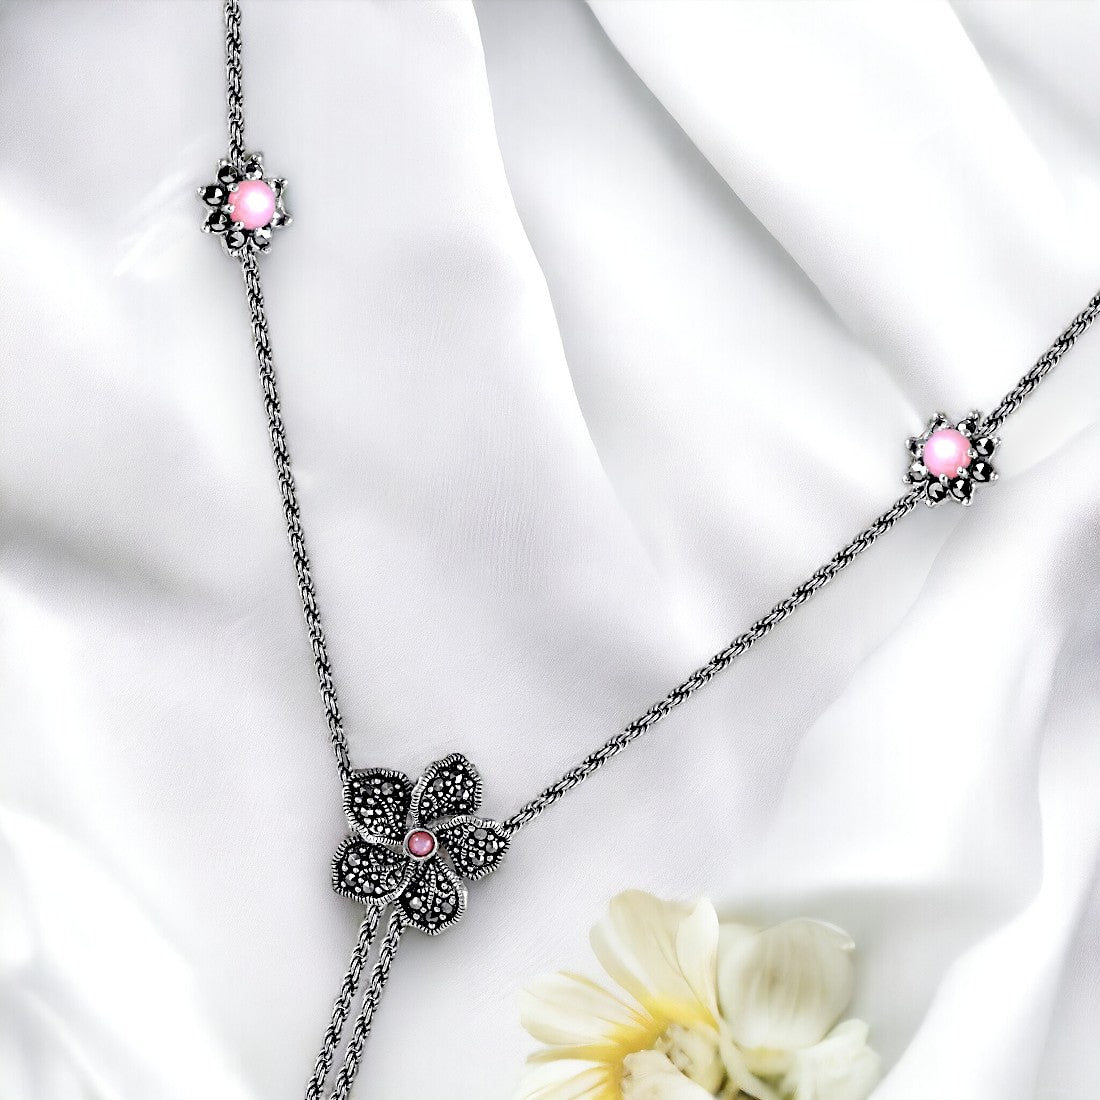 Tassel Flower Necklace Set With Pink Stone